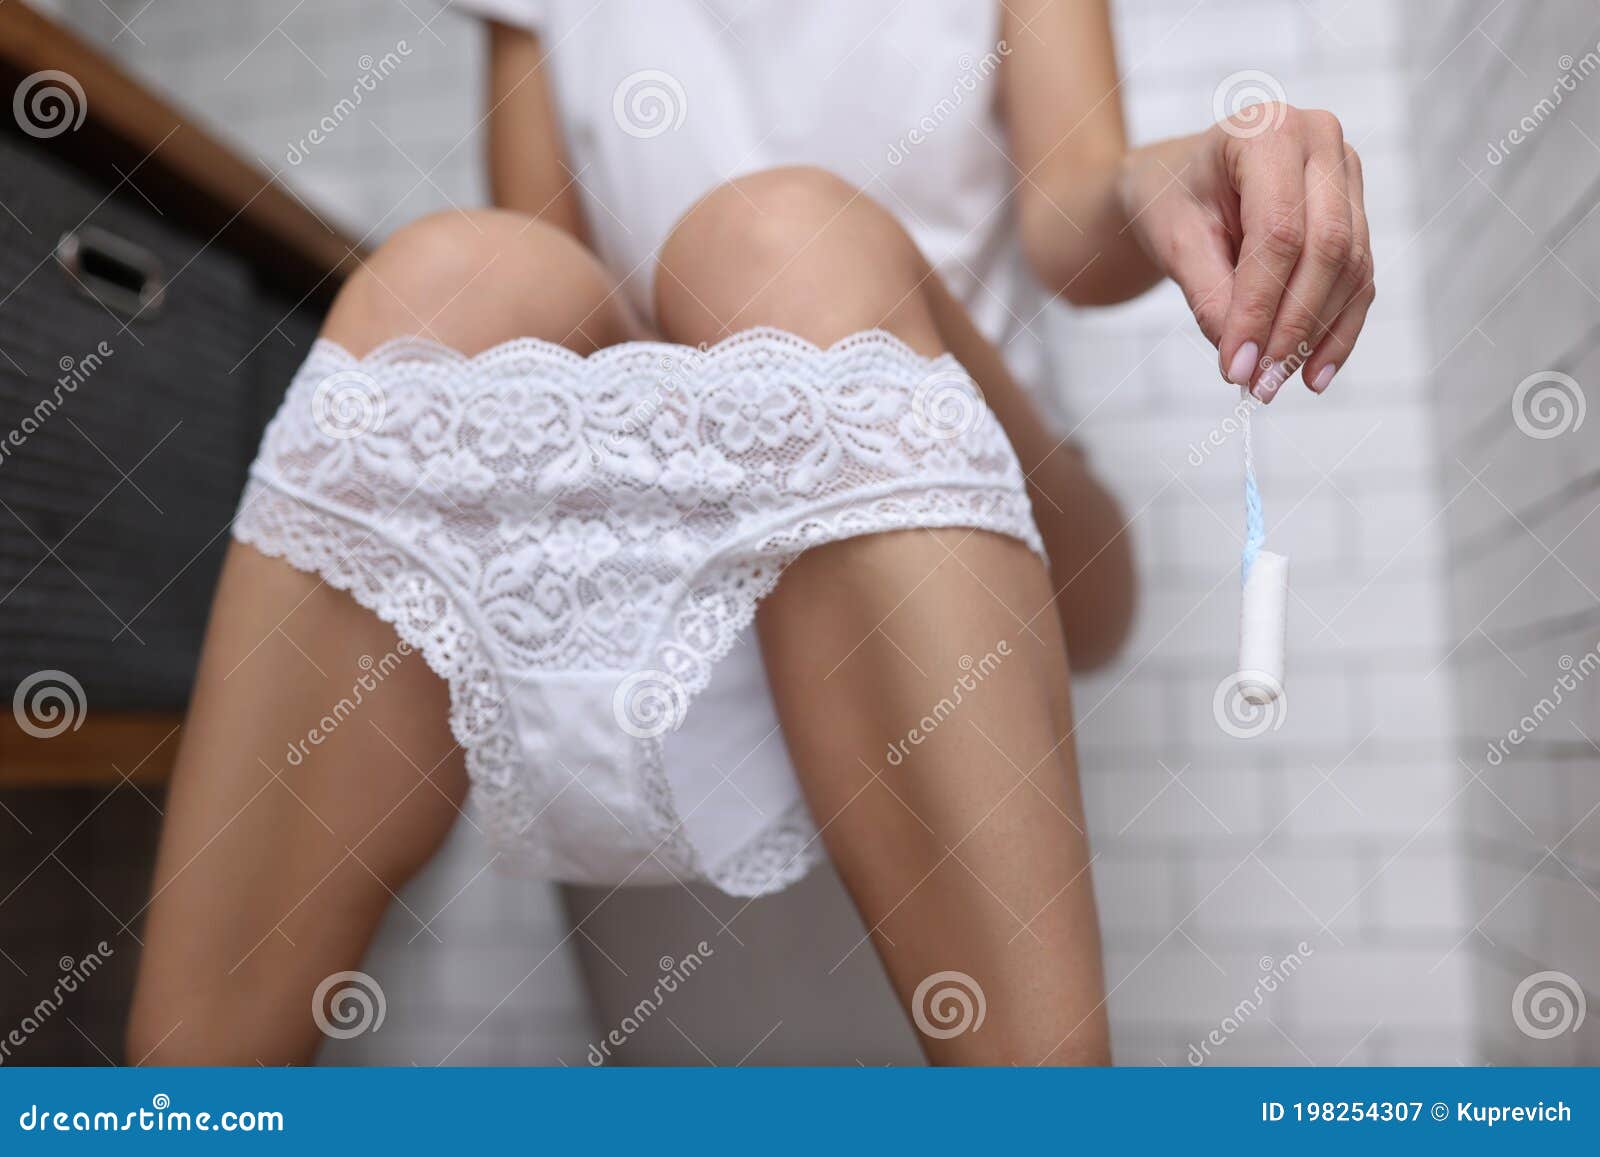 https://thumbs.dreamstime.com/z/woman-sits-toilet-her-underwear-pulled-down-tampon-her-hand-close-up-woman-sits-toilet-her-underwear-198254307.jpg